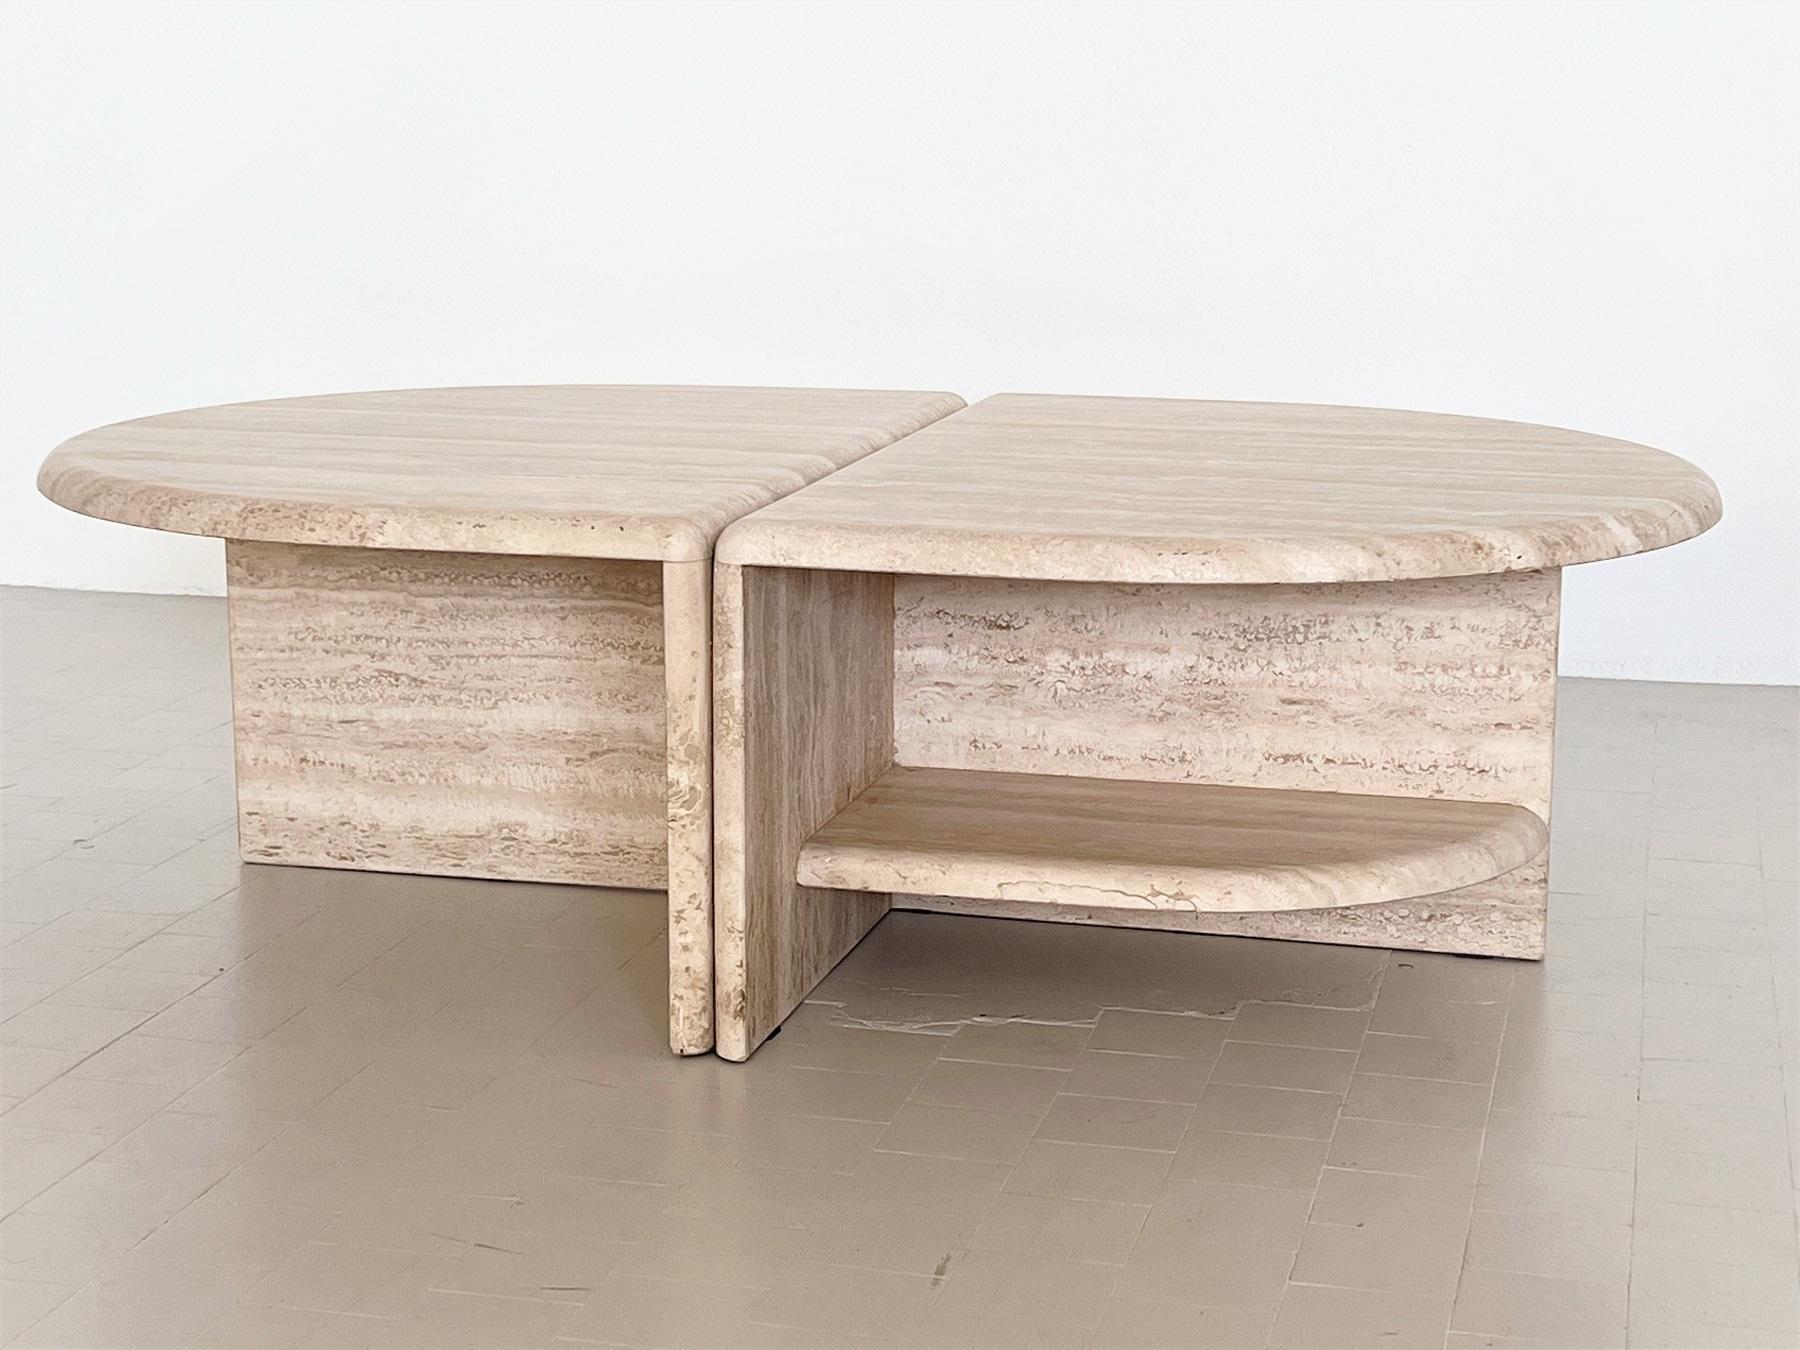 Hand-Crafted Italian Midcentury Travertine Marble Coffee Table of Two Pieces, 1970s